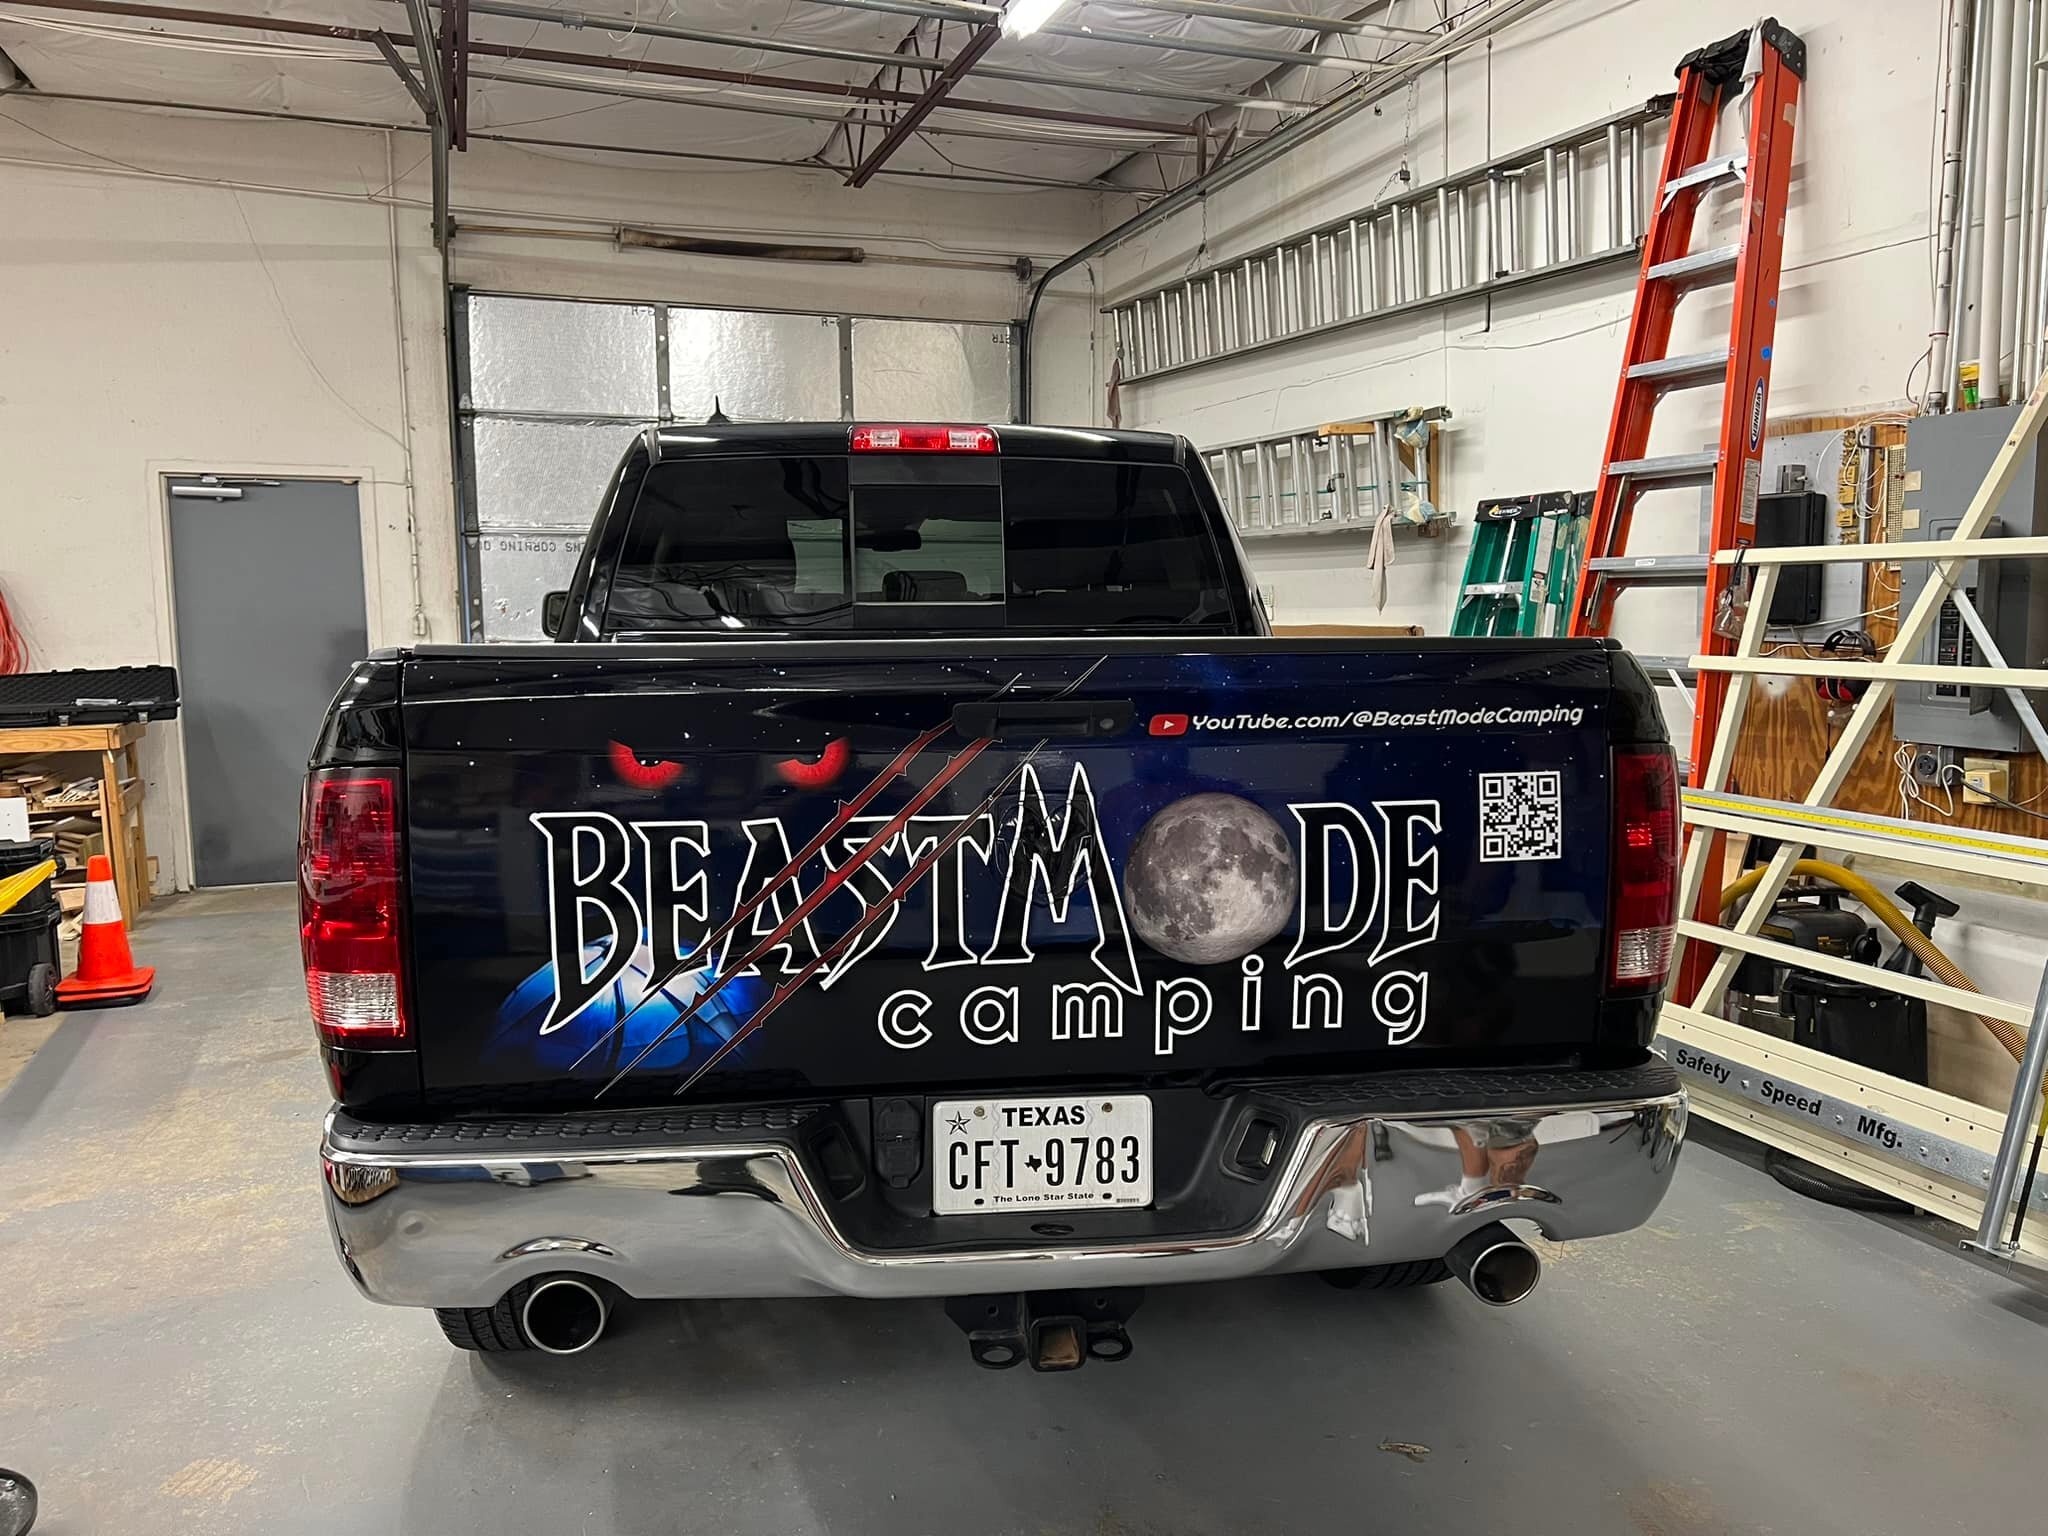 A cool tailgate wrap for our friends at beast mode camping. Check out their channel for some cool vids. 
YouTube.com/@beastmodecamping